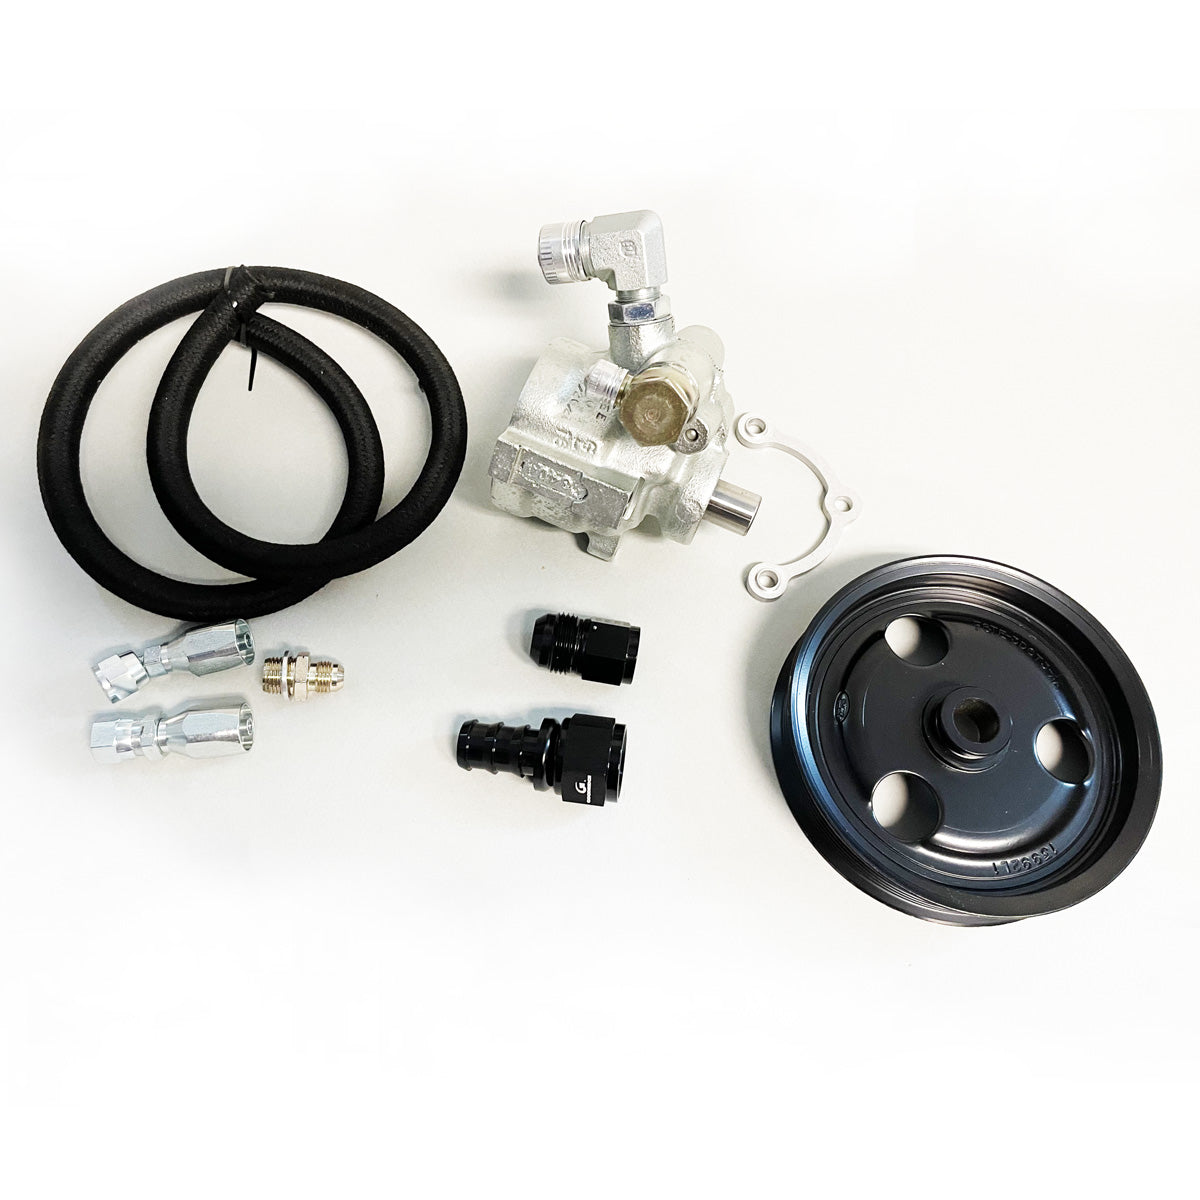 Complete Steering Package for 2008-2010 Ford F250/F350/Excursion with RAM Assist and Hydroboost